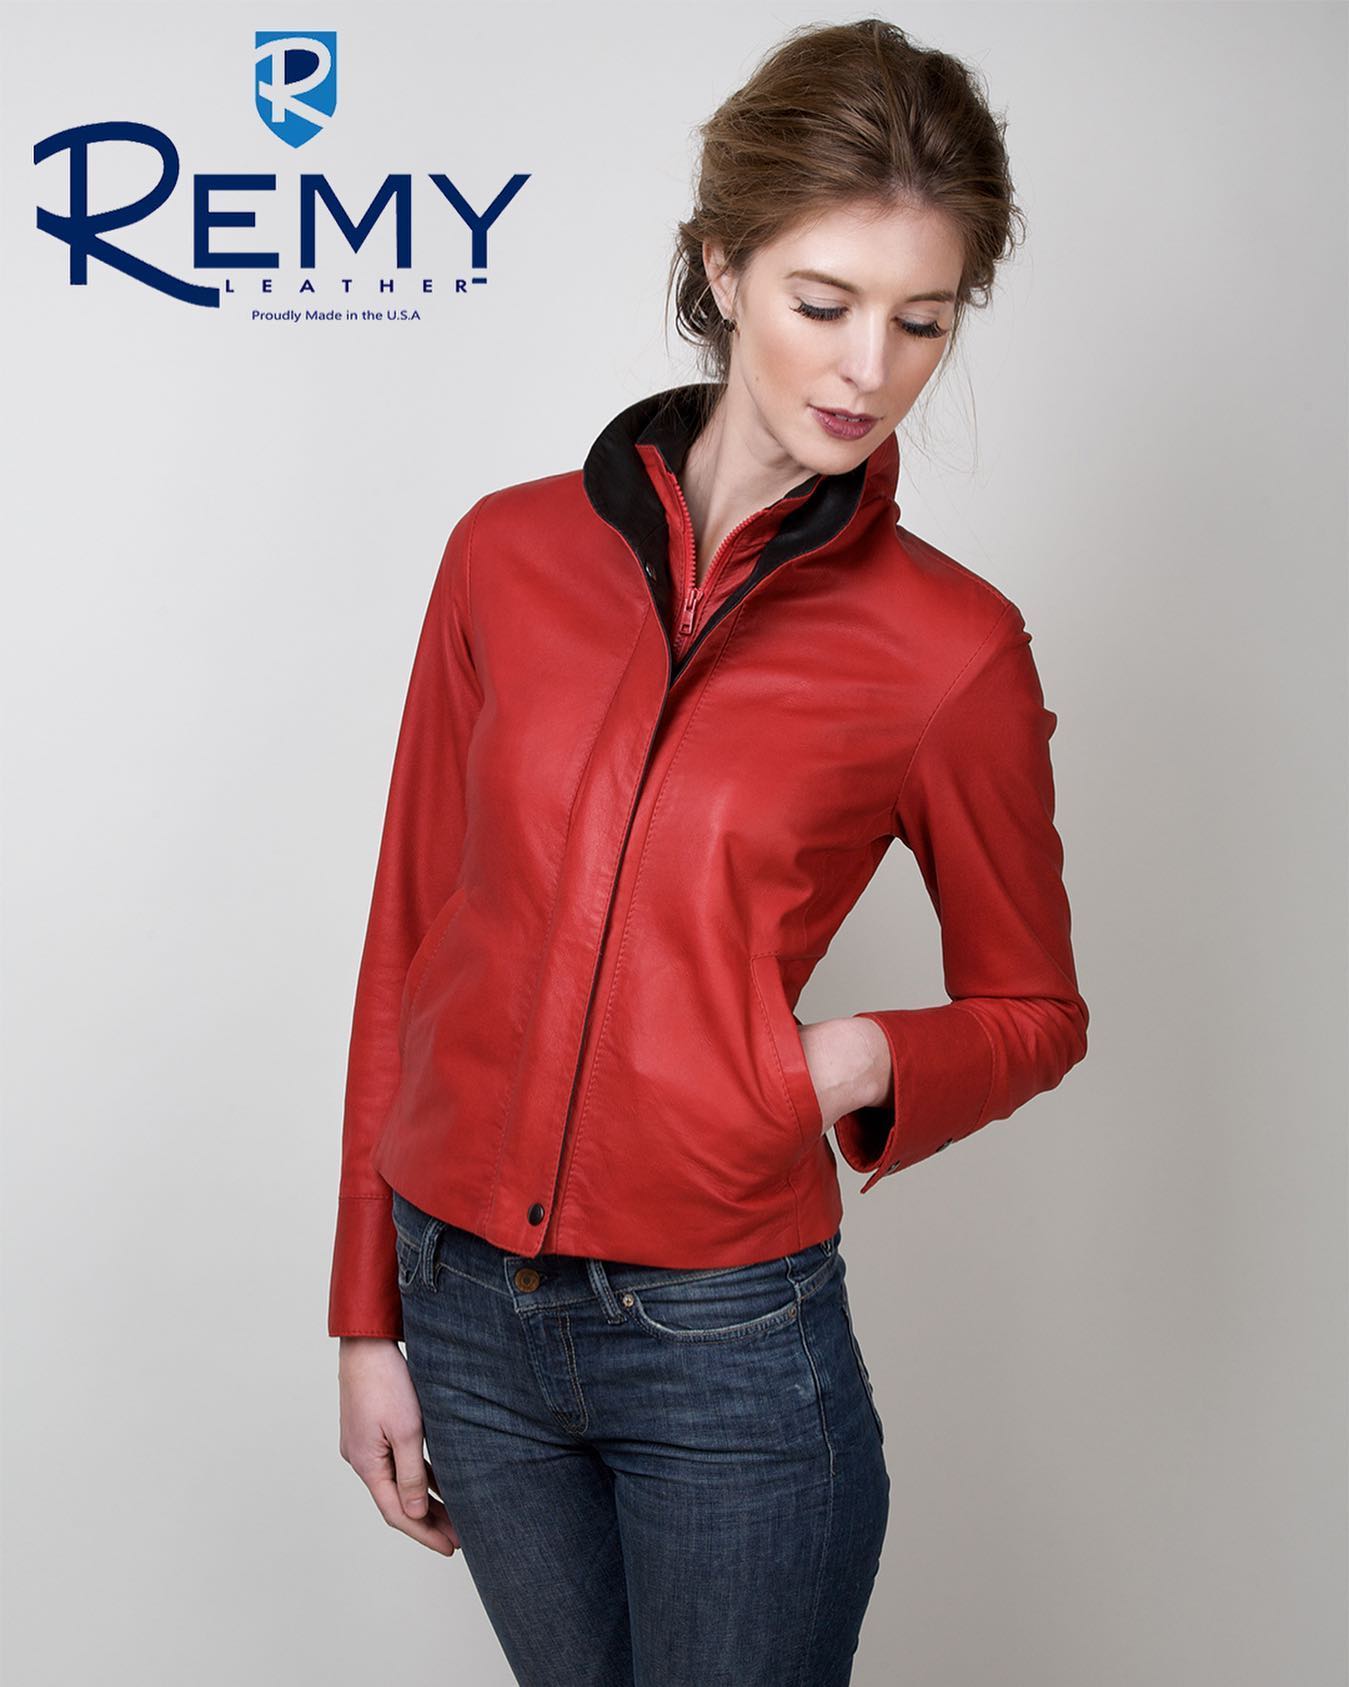 Double Leather Leather (Sausalito) Remy Light Collar Women\'s – Red Pegasus